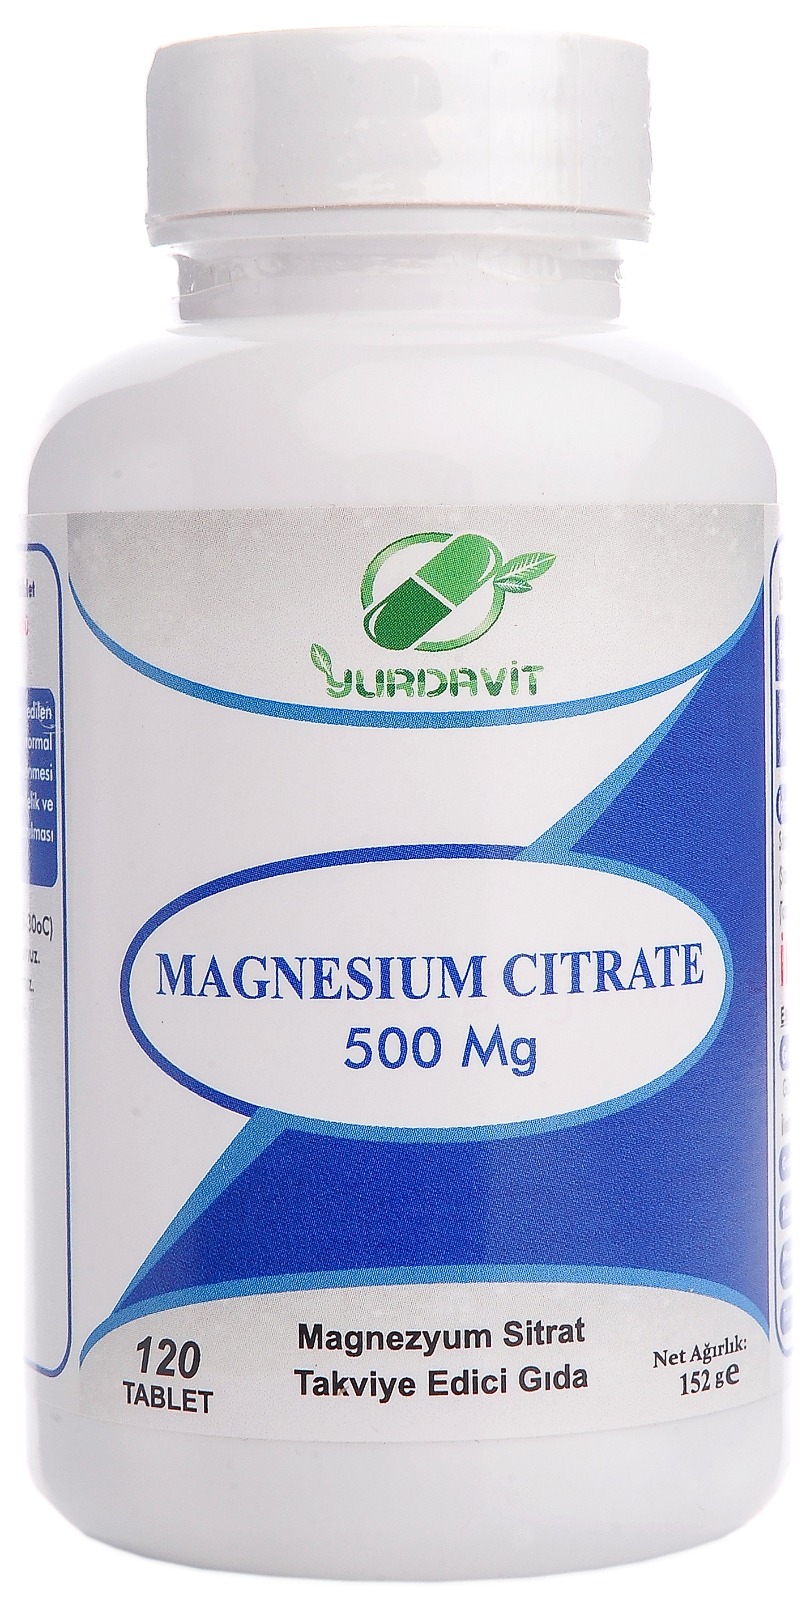 Magnezyum Sitrat 500 Mg 120 Tablet Magnesium Citrate